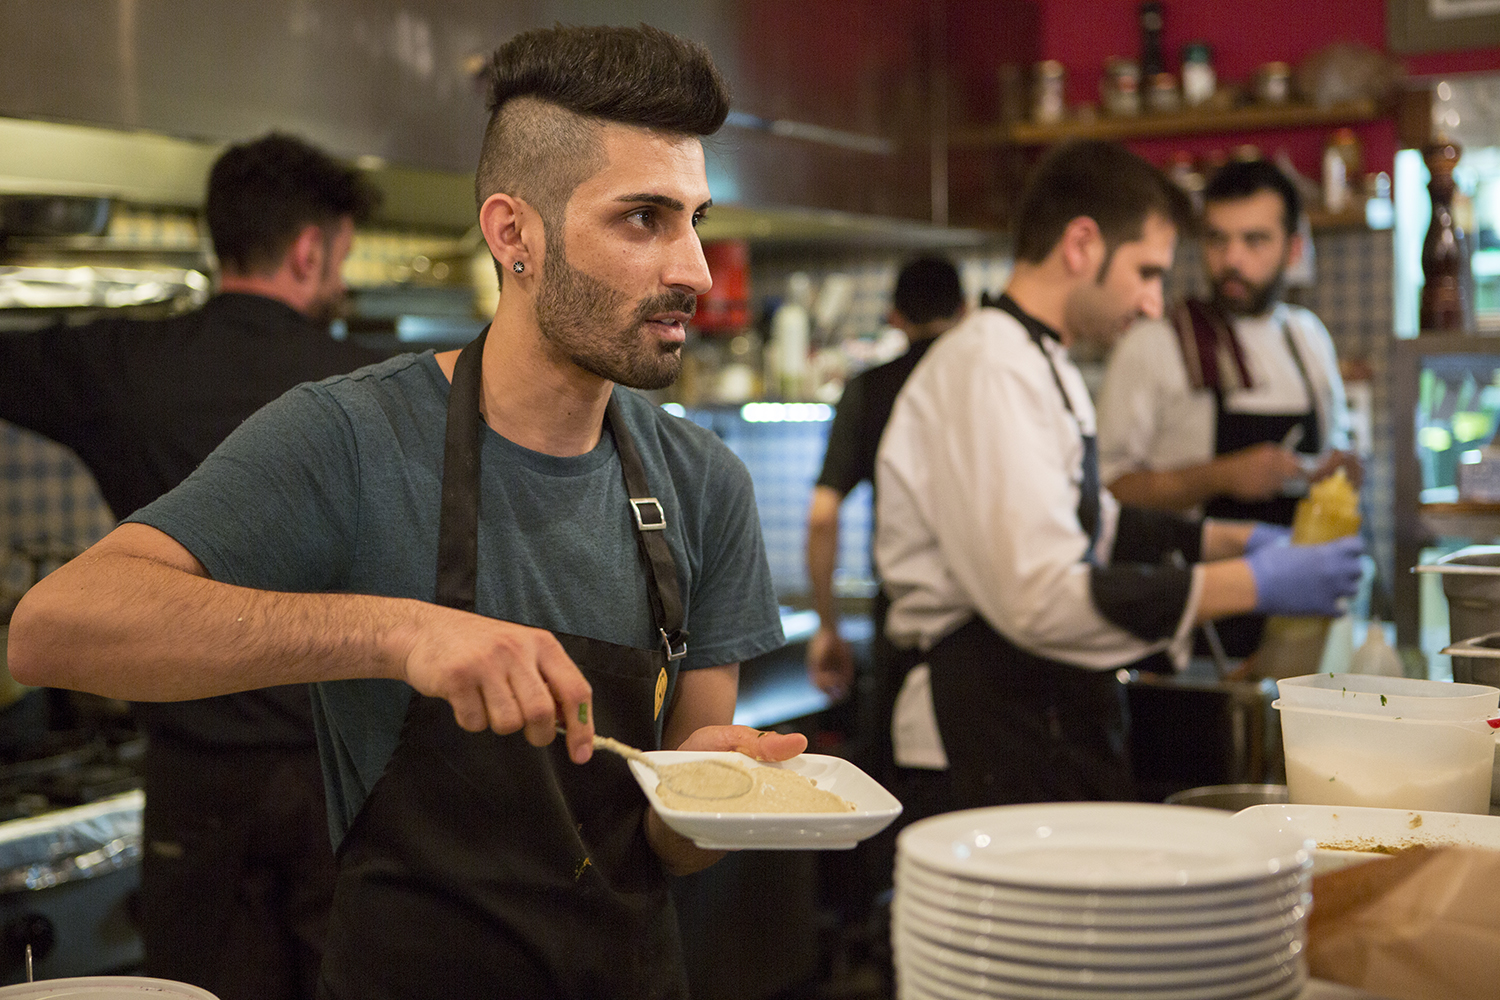 Syrian cook, Barshank Haj Younes, is preparing his dishes in the kitchen of a crowded restaurant in central Athens. 